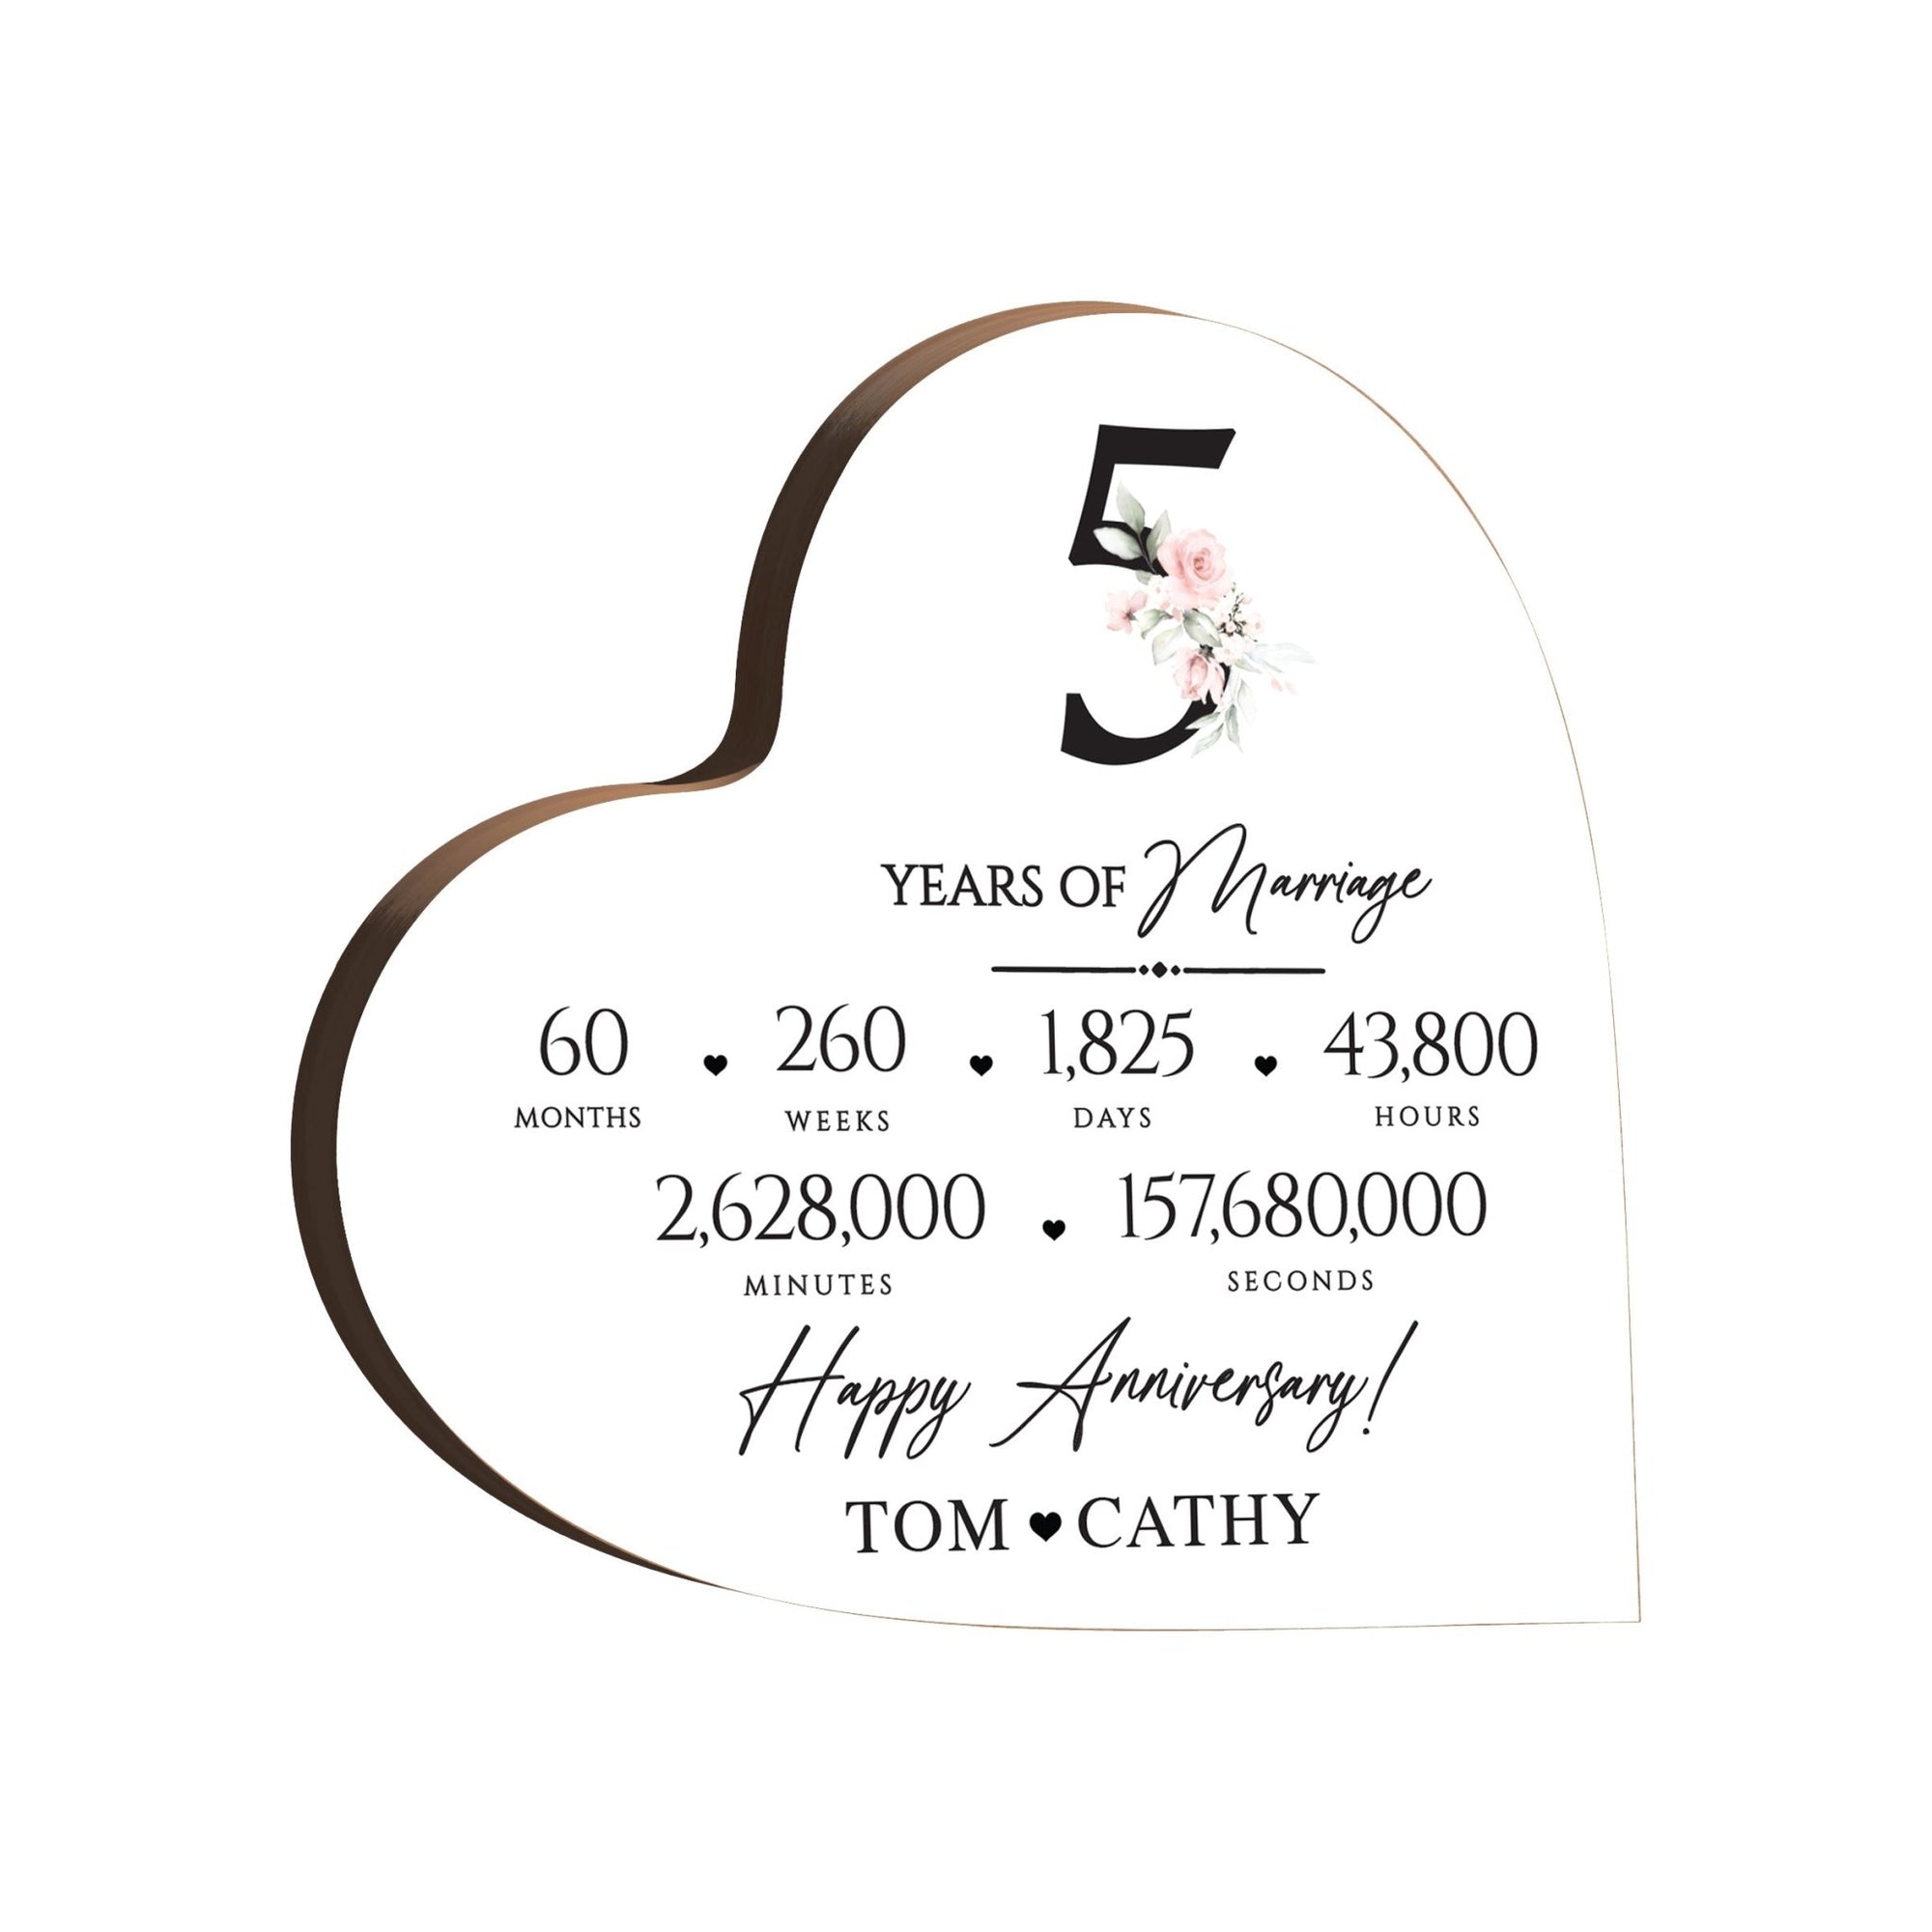 Personalized Wooden Anniversary Heart Shaped Signs - 5th Anniversary - LifeSong Milestones